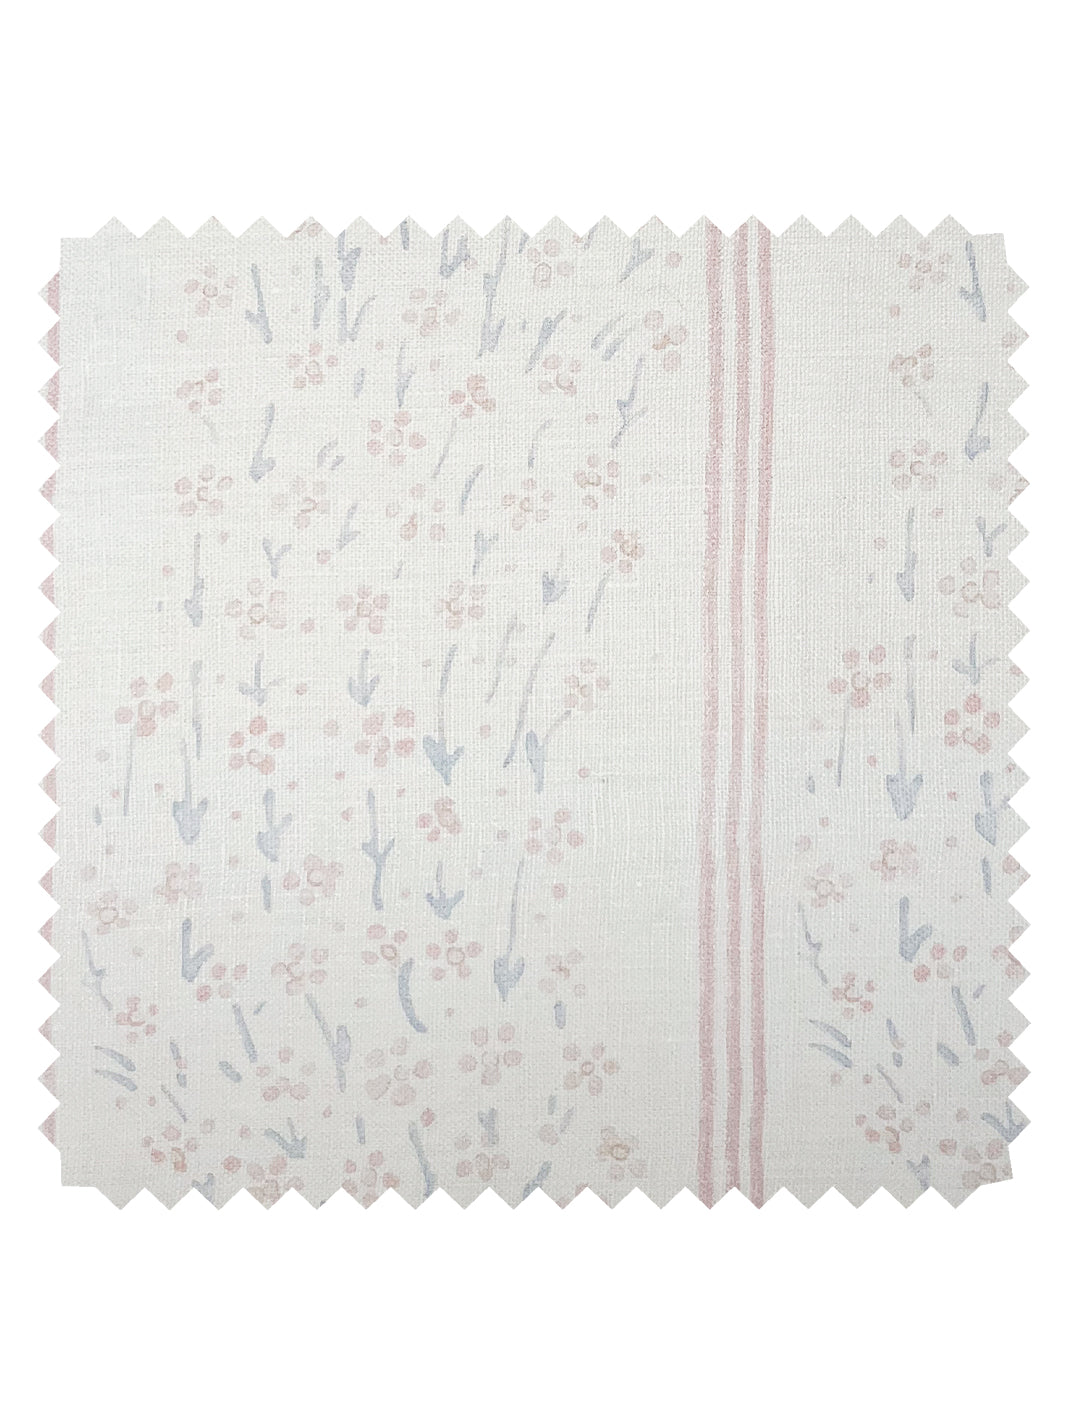 'Hillhouse Floral Ditsy Wave Stripe' Linen Fabric by Nathan Turner - Pink Blue